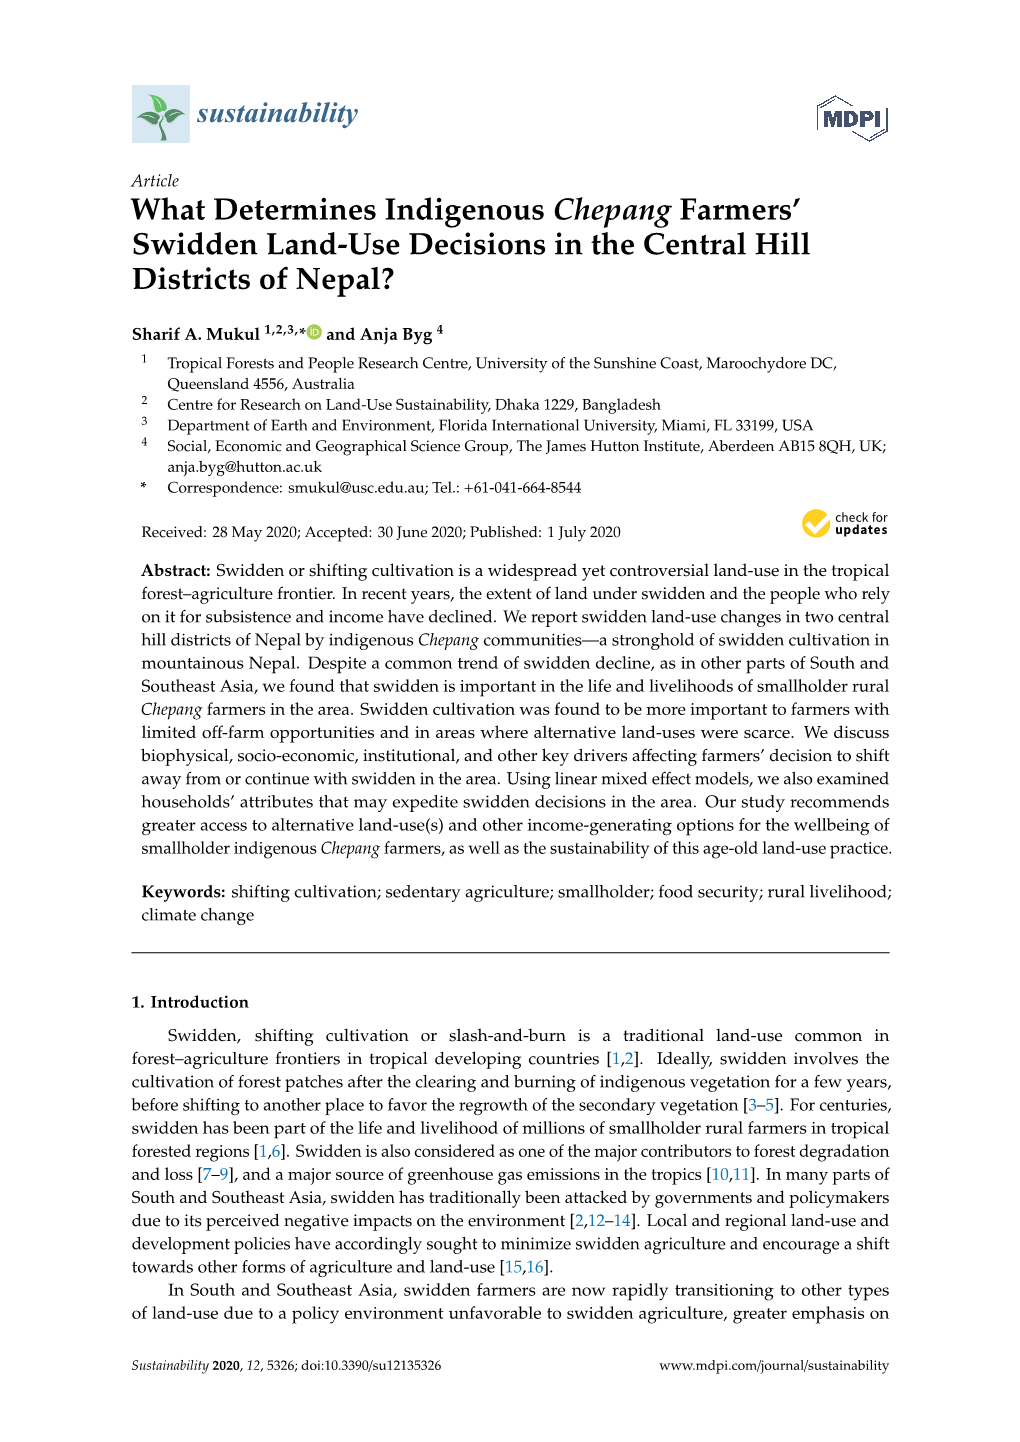 What Determines Indigenous Chepang Farmers' Swidden Land-Use Decisions in the Central Hill Districts of Nepal?